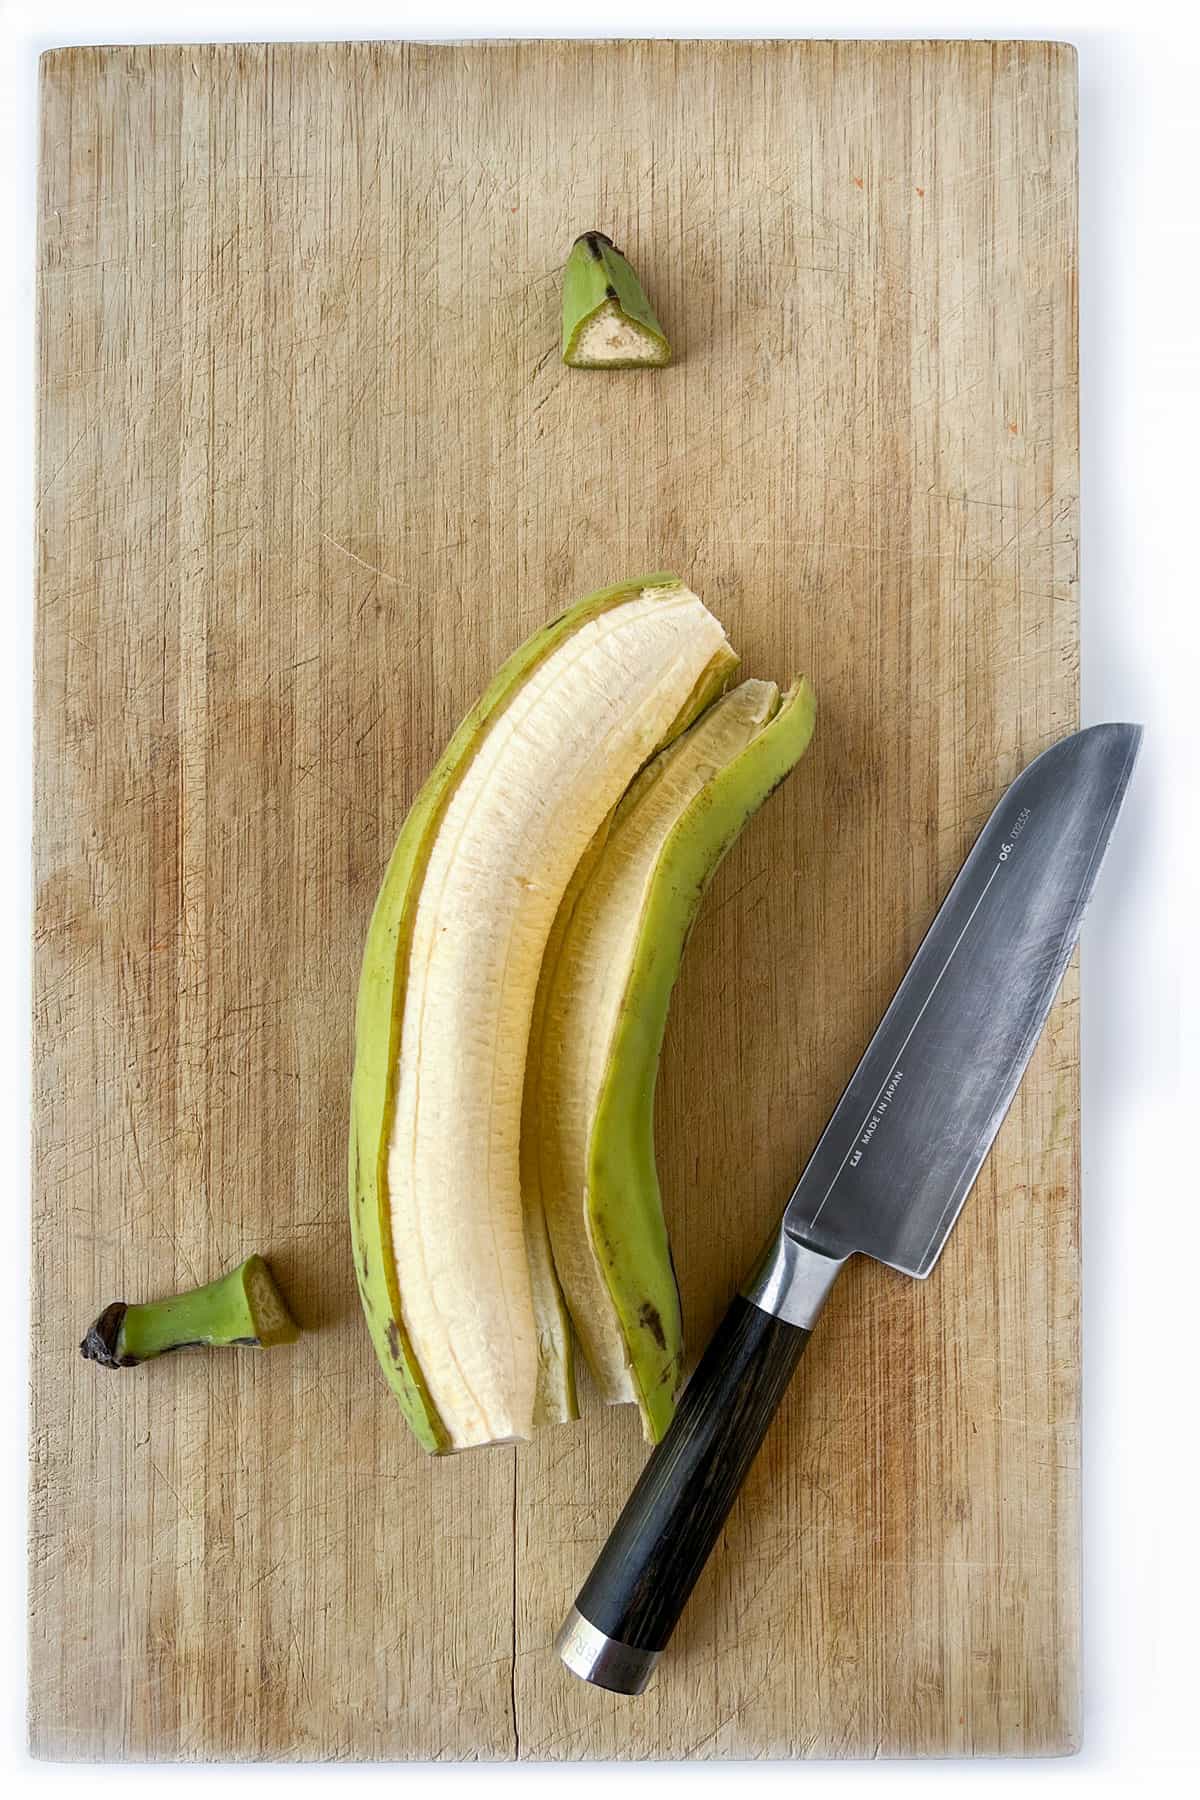 A green plantain with the skin peeled off and the ends snipped off